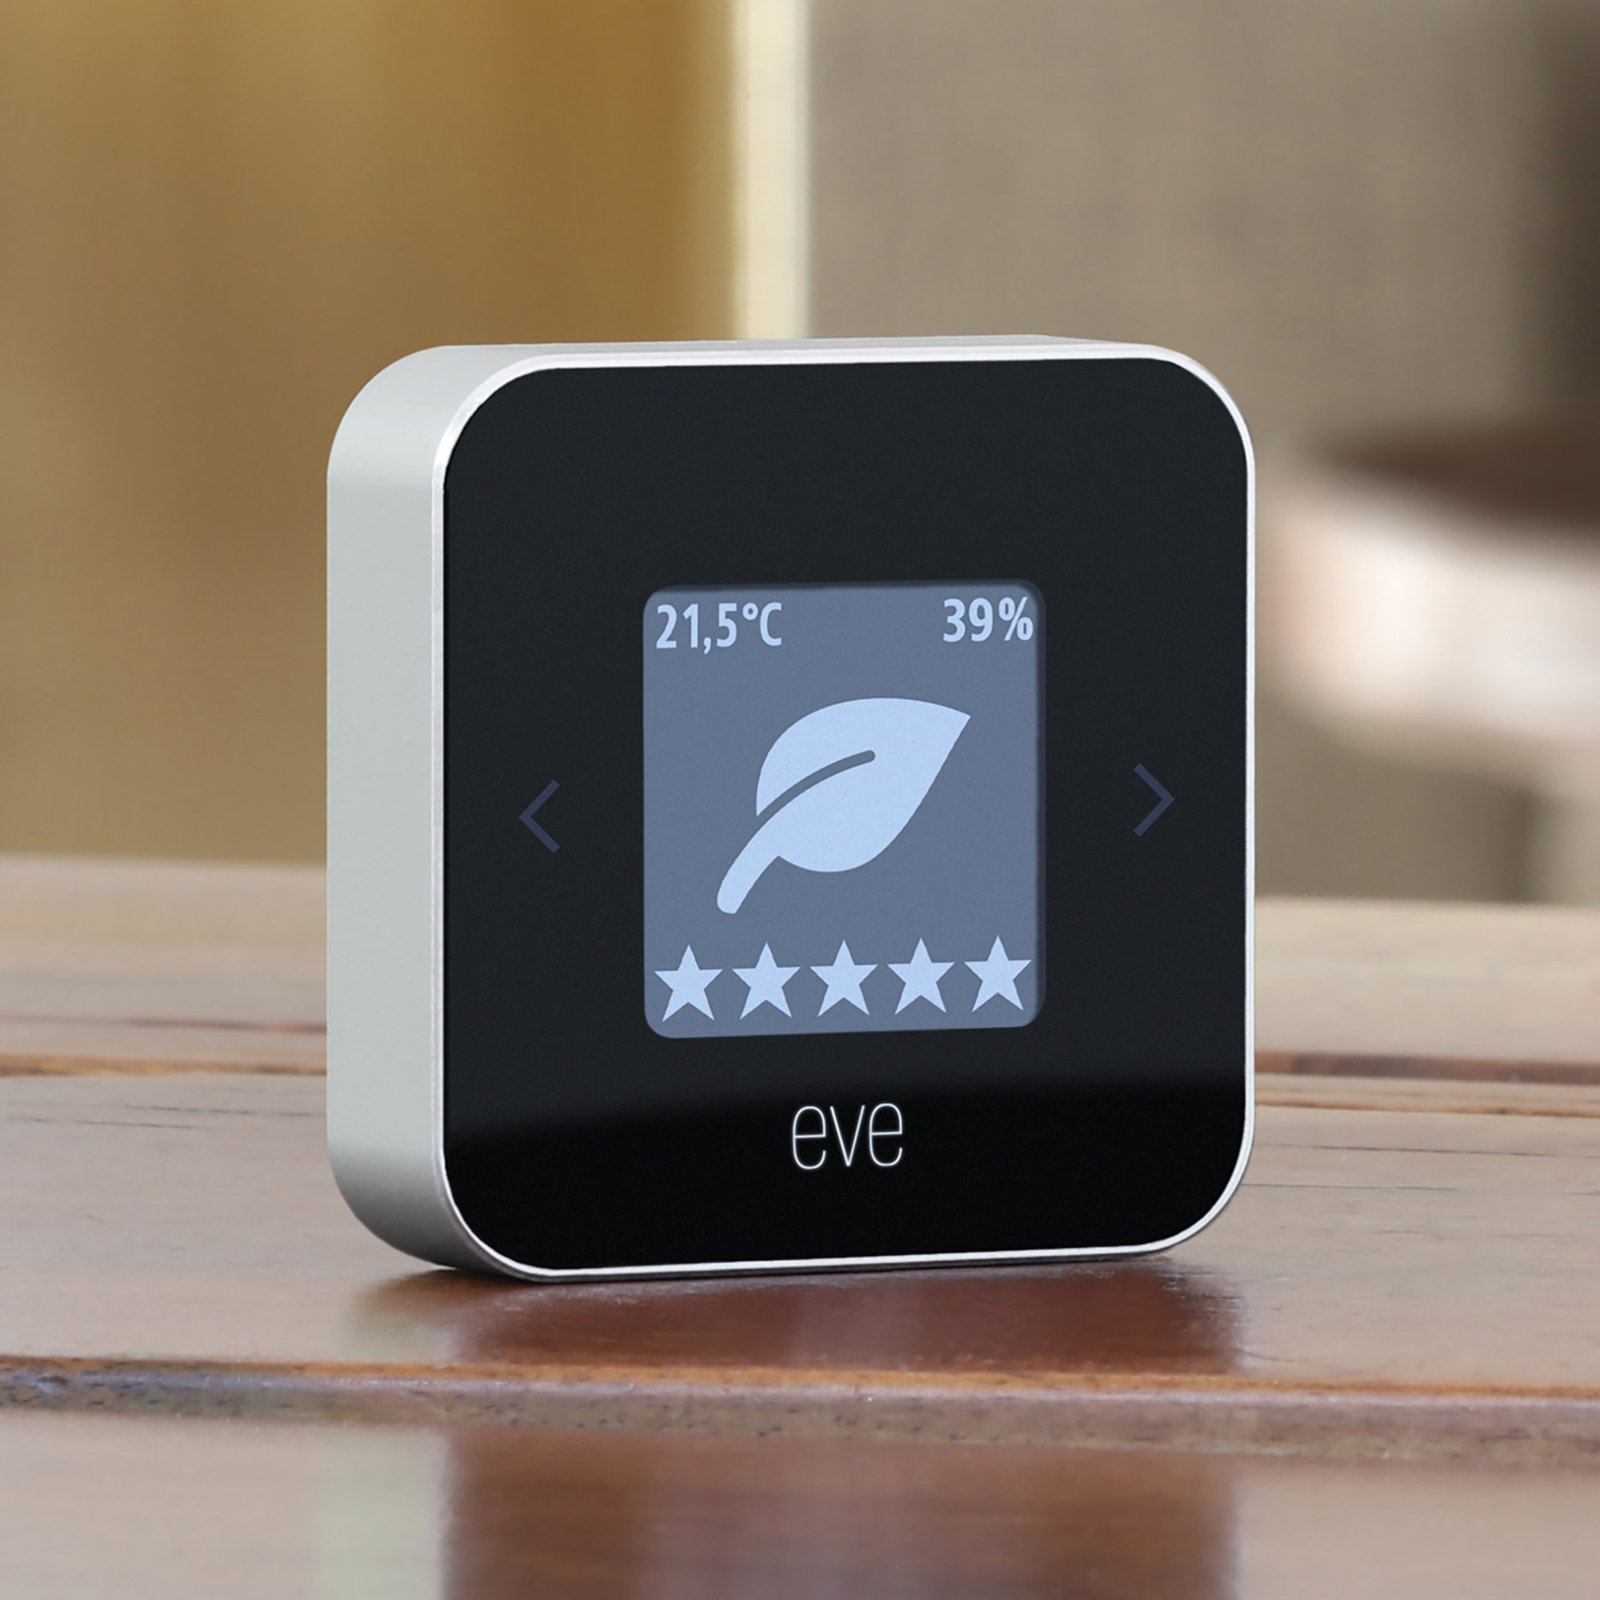 Eve Room air-conditioning and air quality monitor